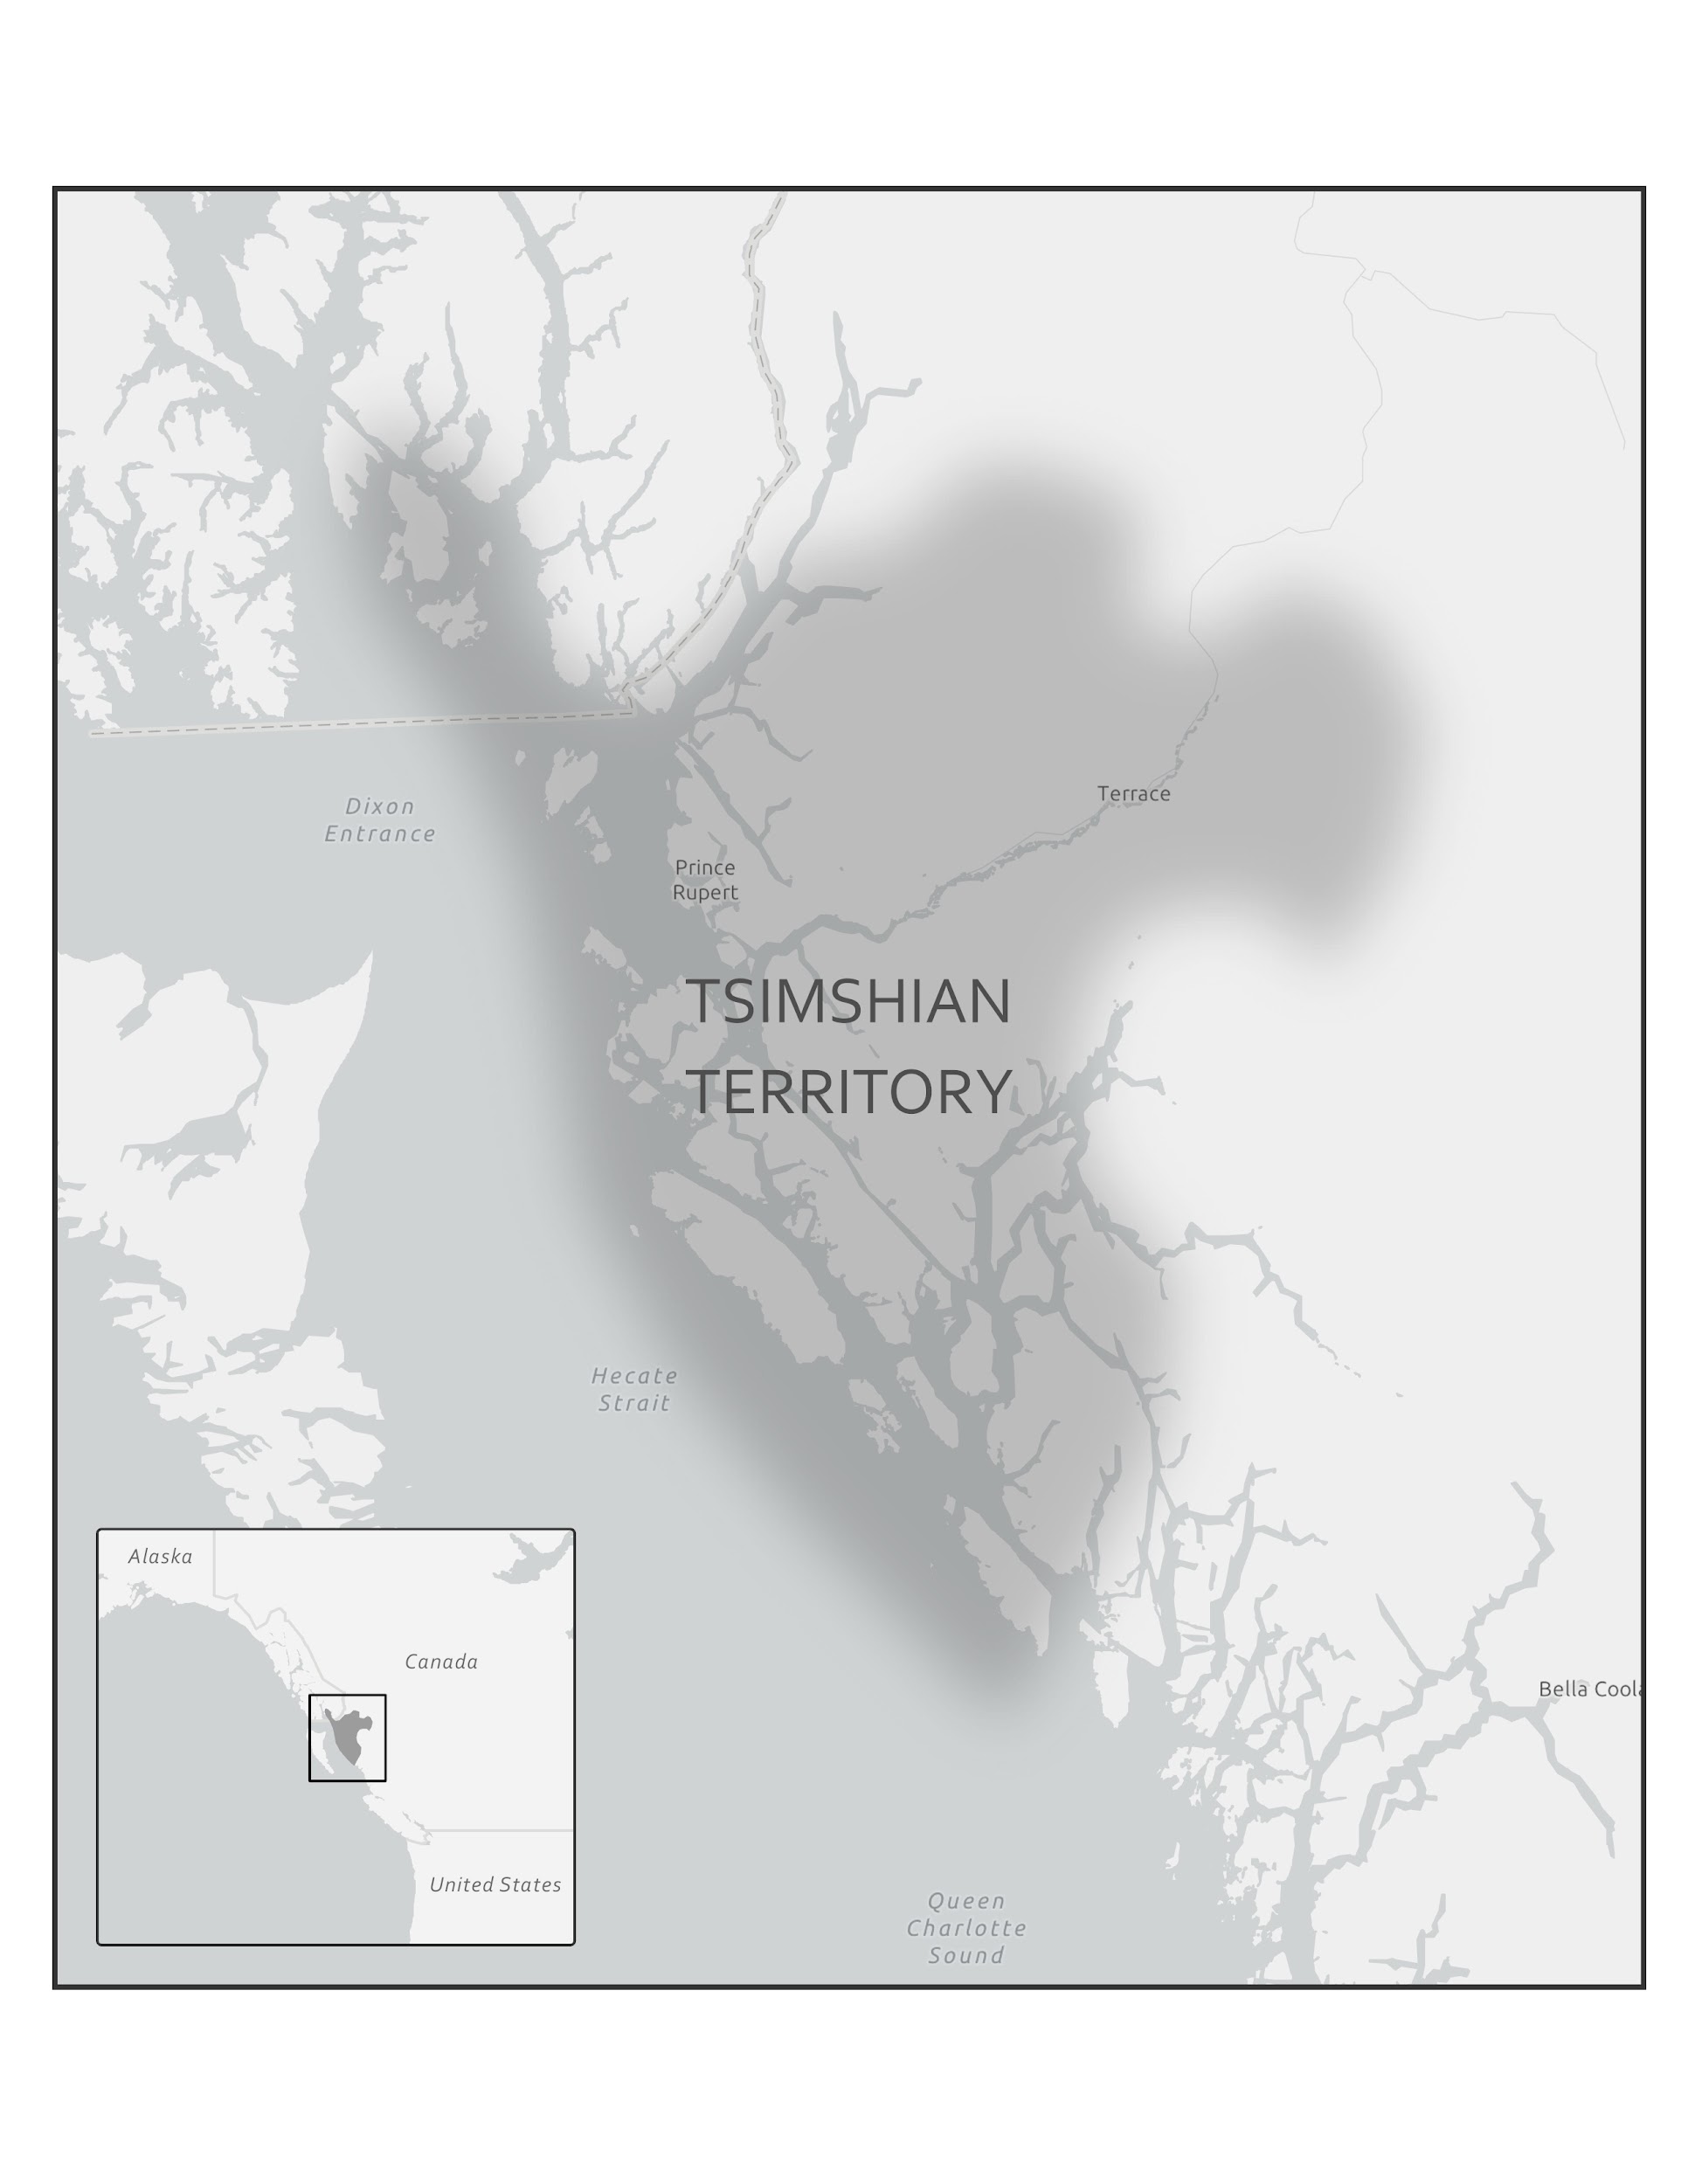 Tsimshian territory on the coast of British Columbia next to the Hecate Strait.